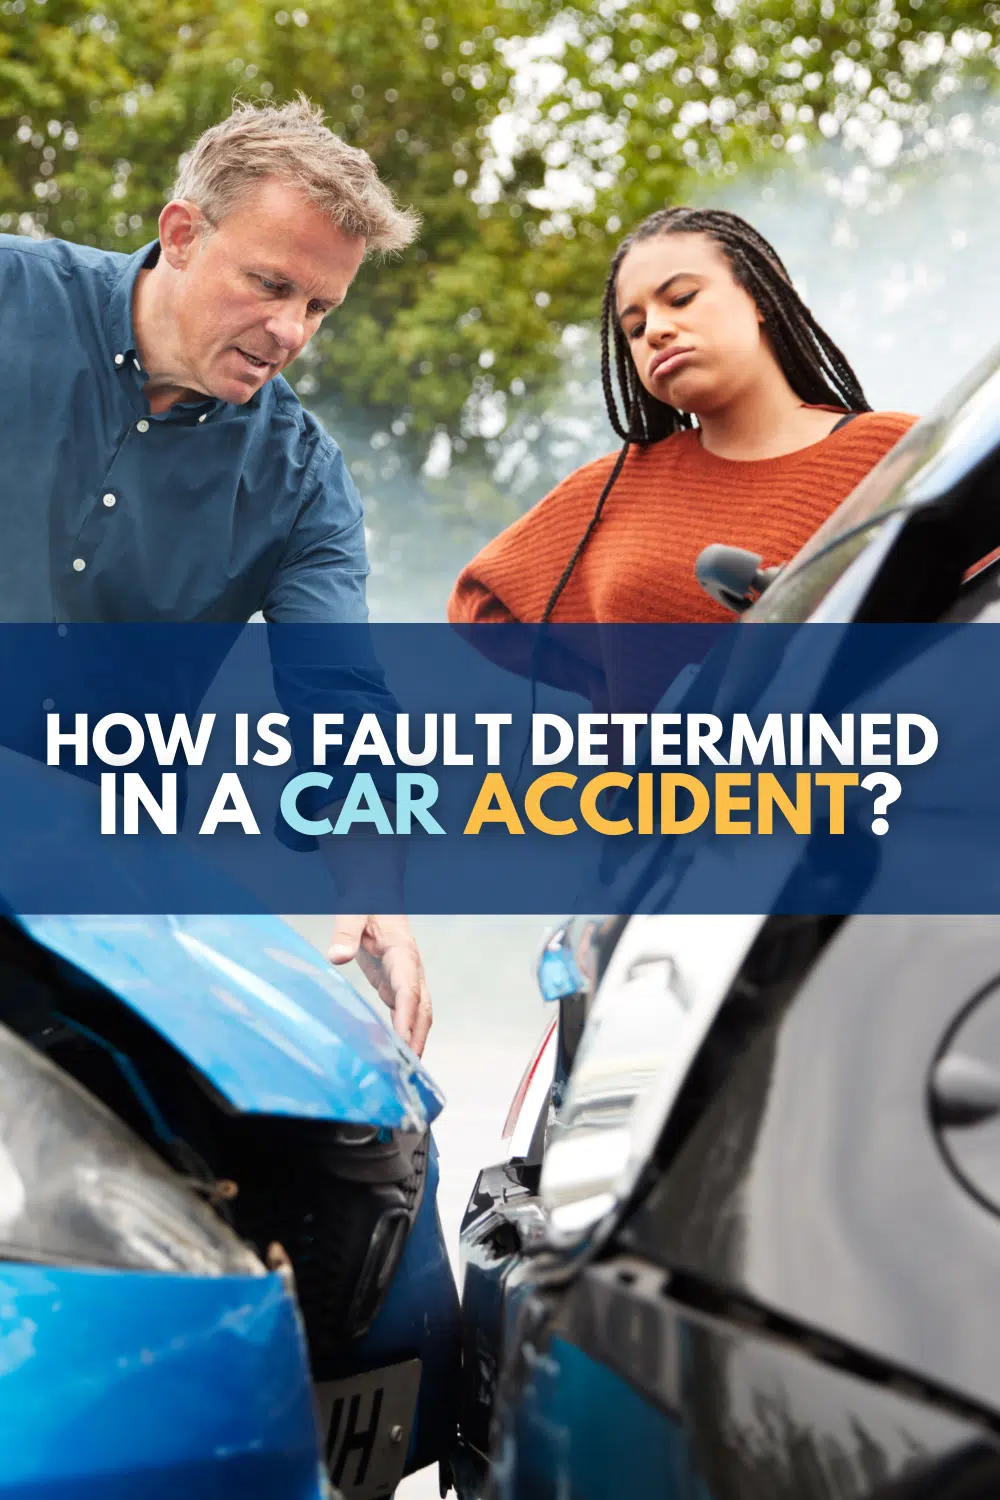 How Is Fault Determined In A Car Accident?